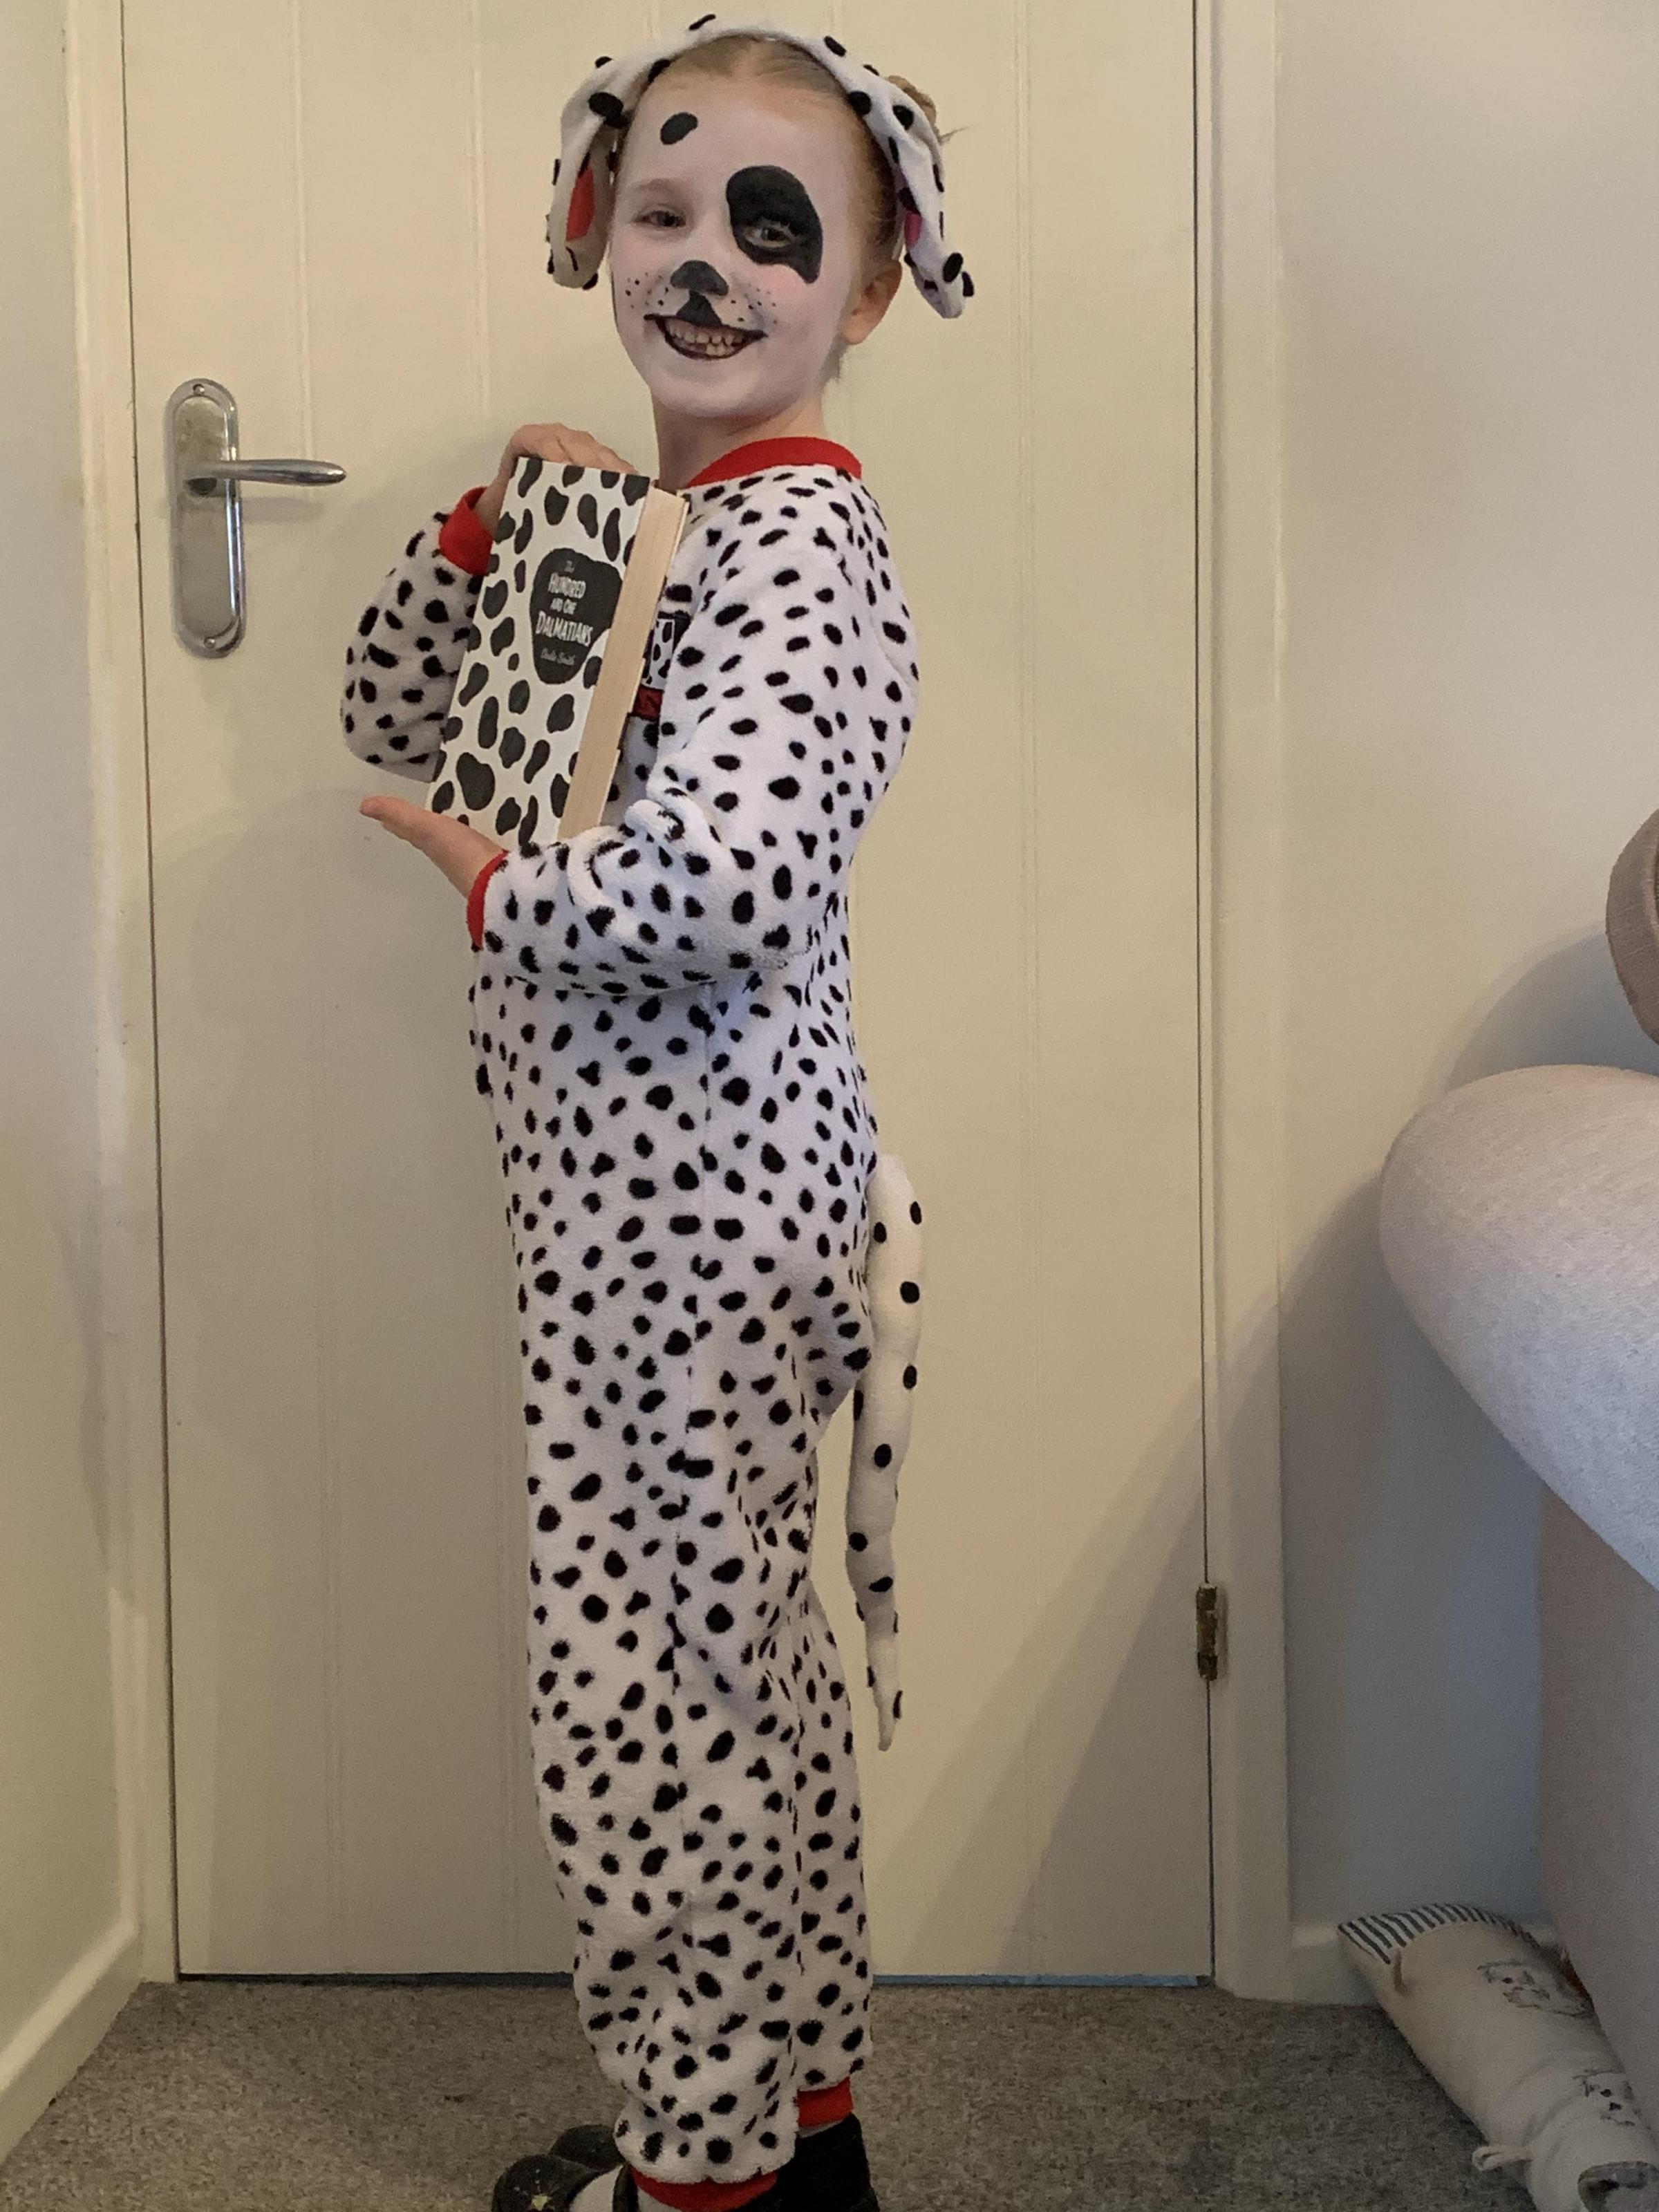 Think spotty and you could be a Dalmatian